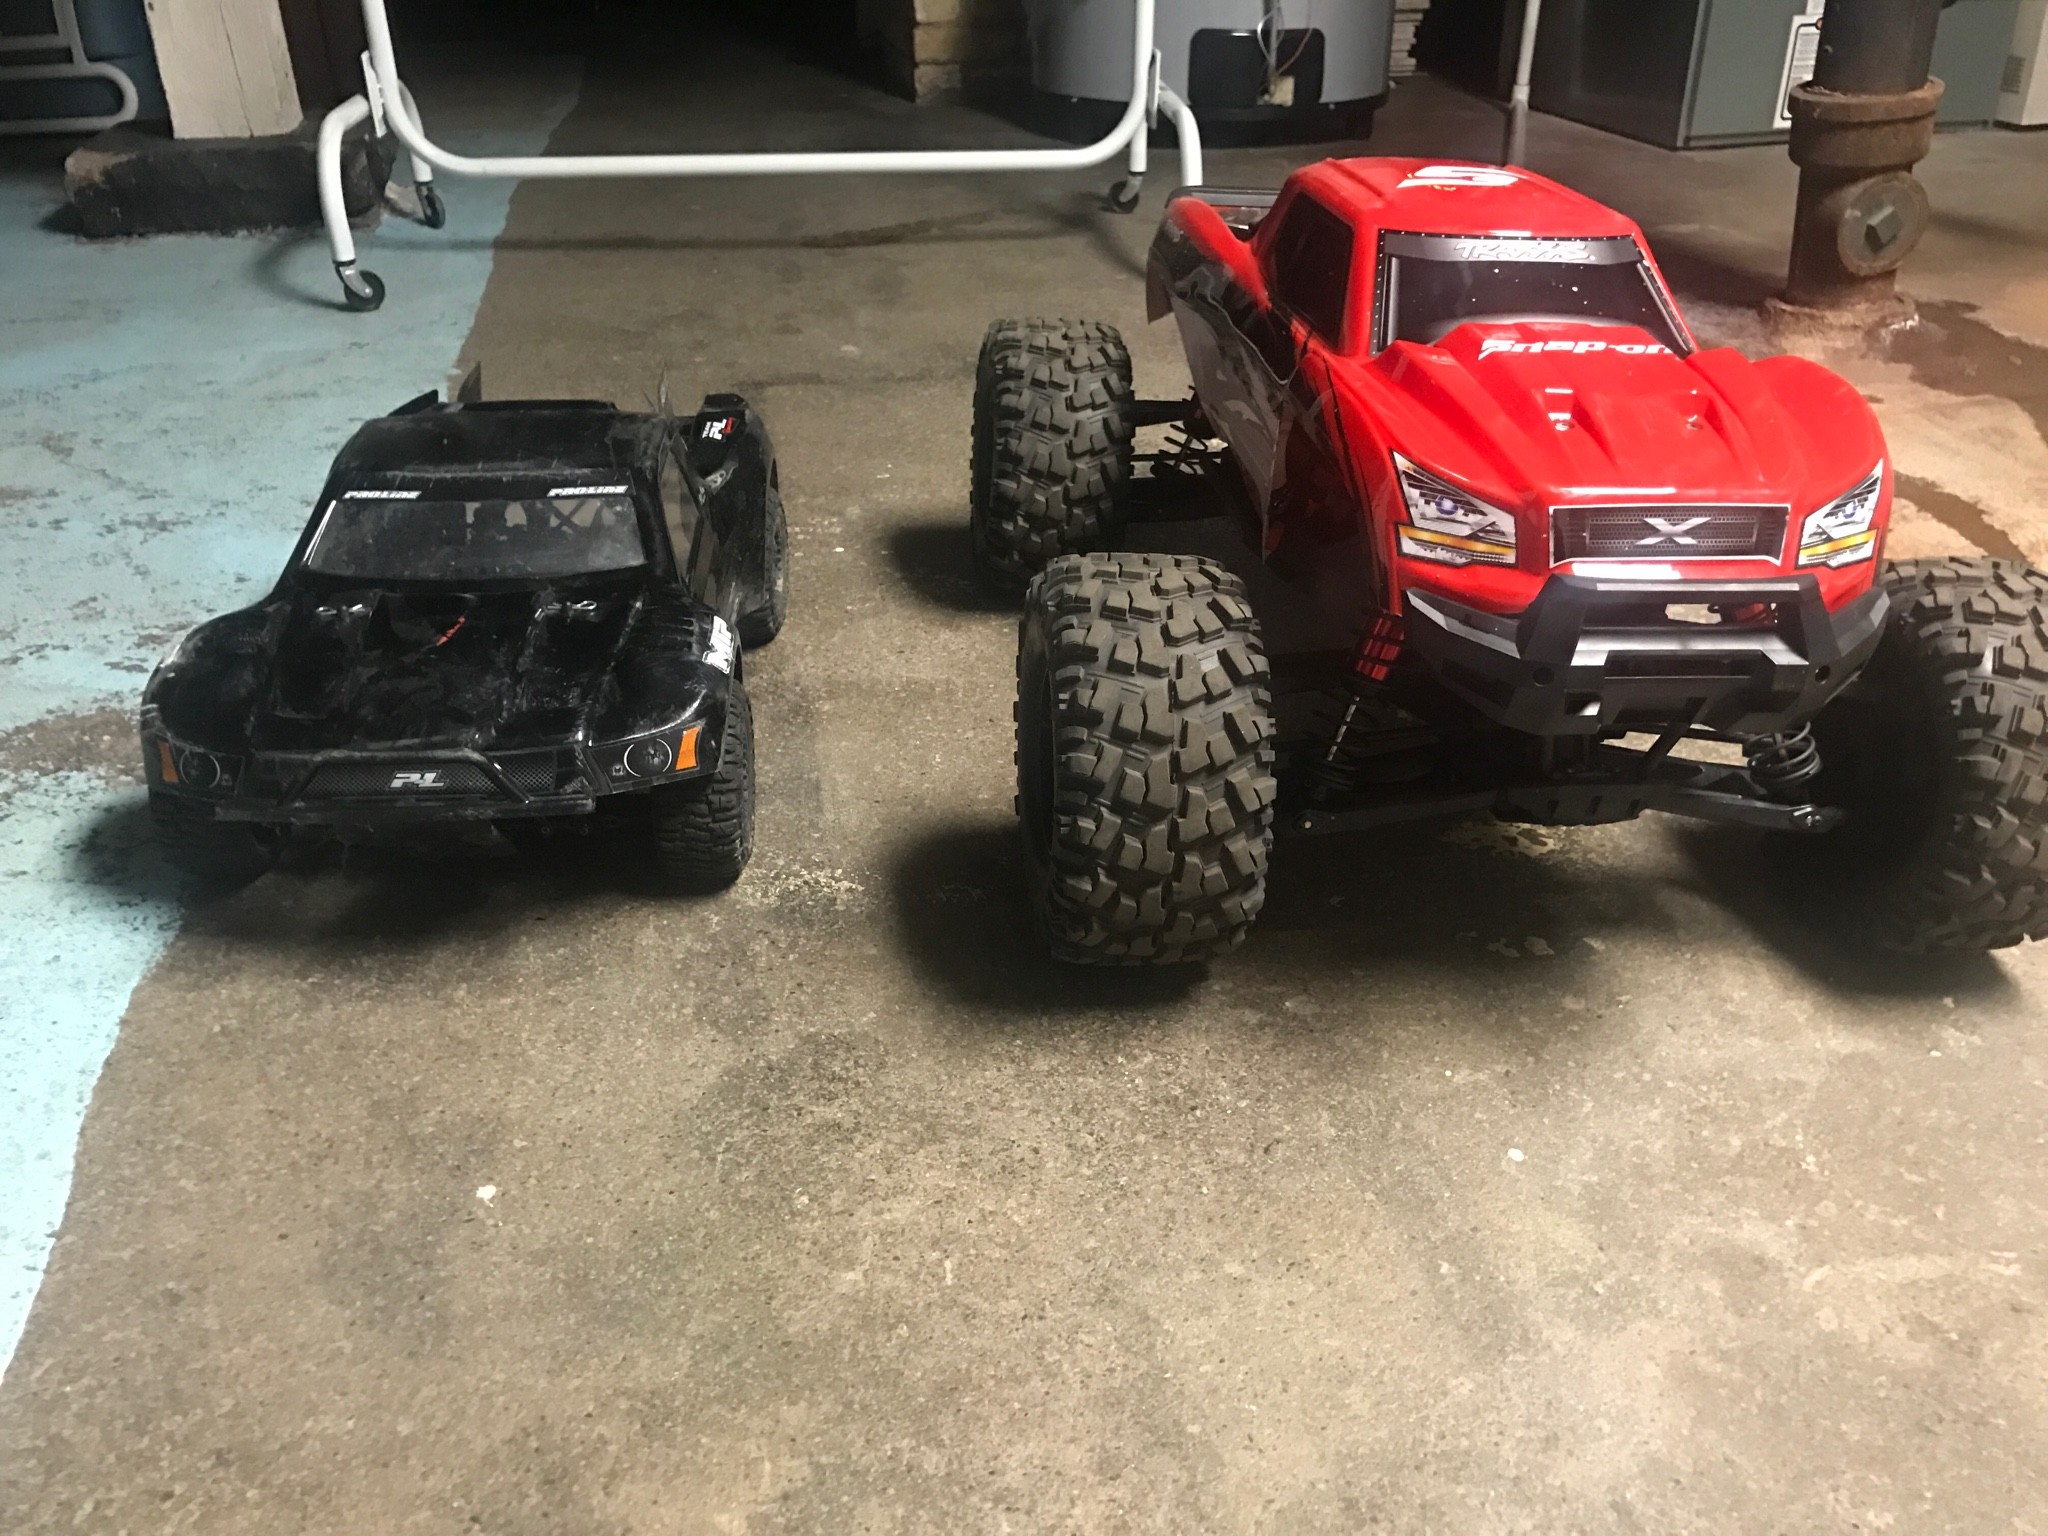 2048x1536 here's mine next to my slash. i still can't get over how much fun it is.  i'm waiting to get the 4s batteries though. i want to have some fun with it  ...